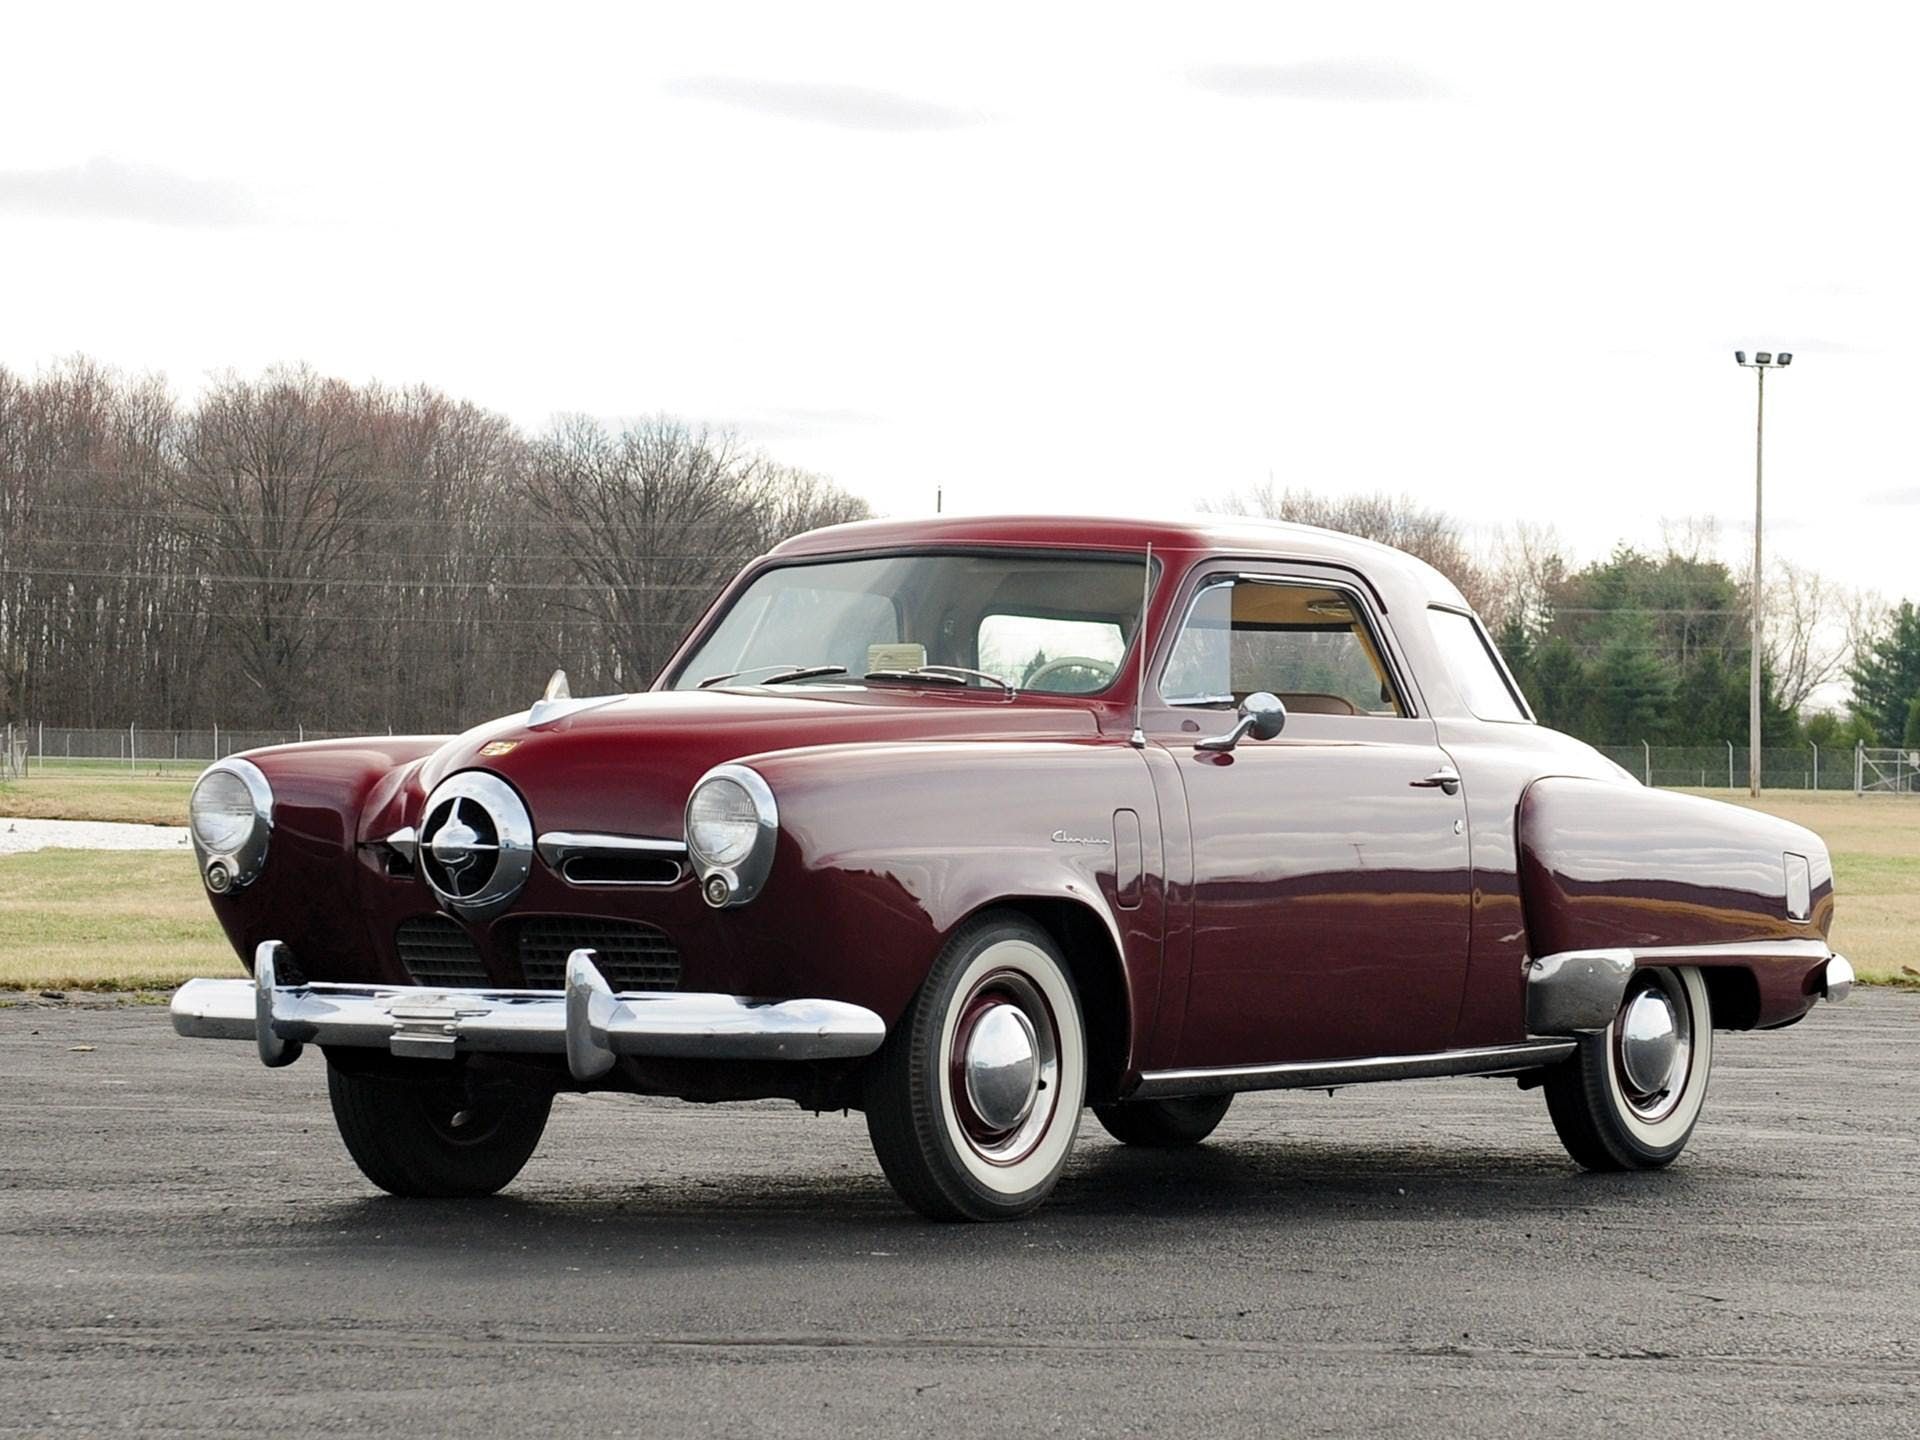 1950 Studebaker Champion parked in an empty lot